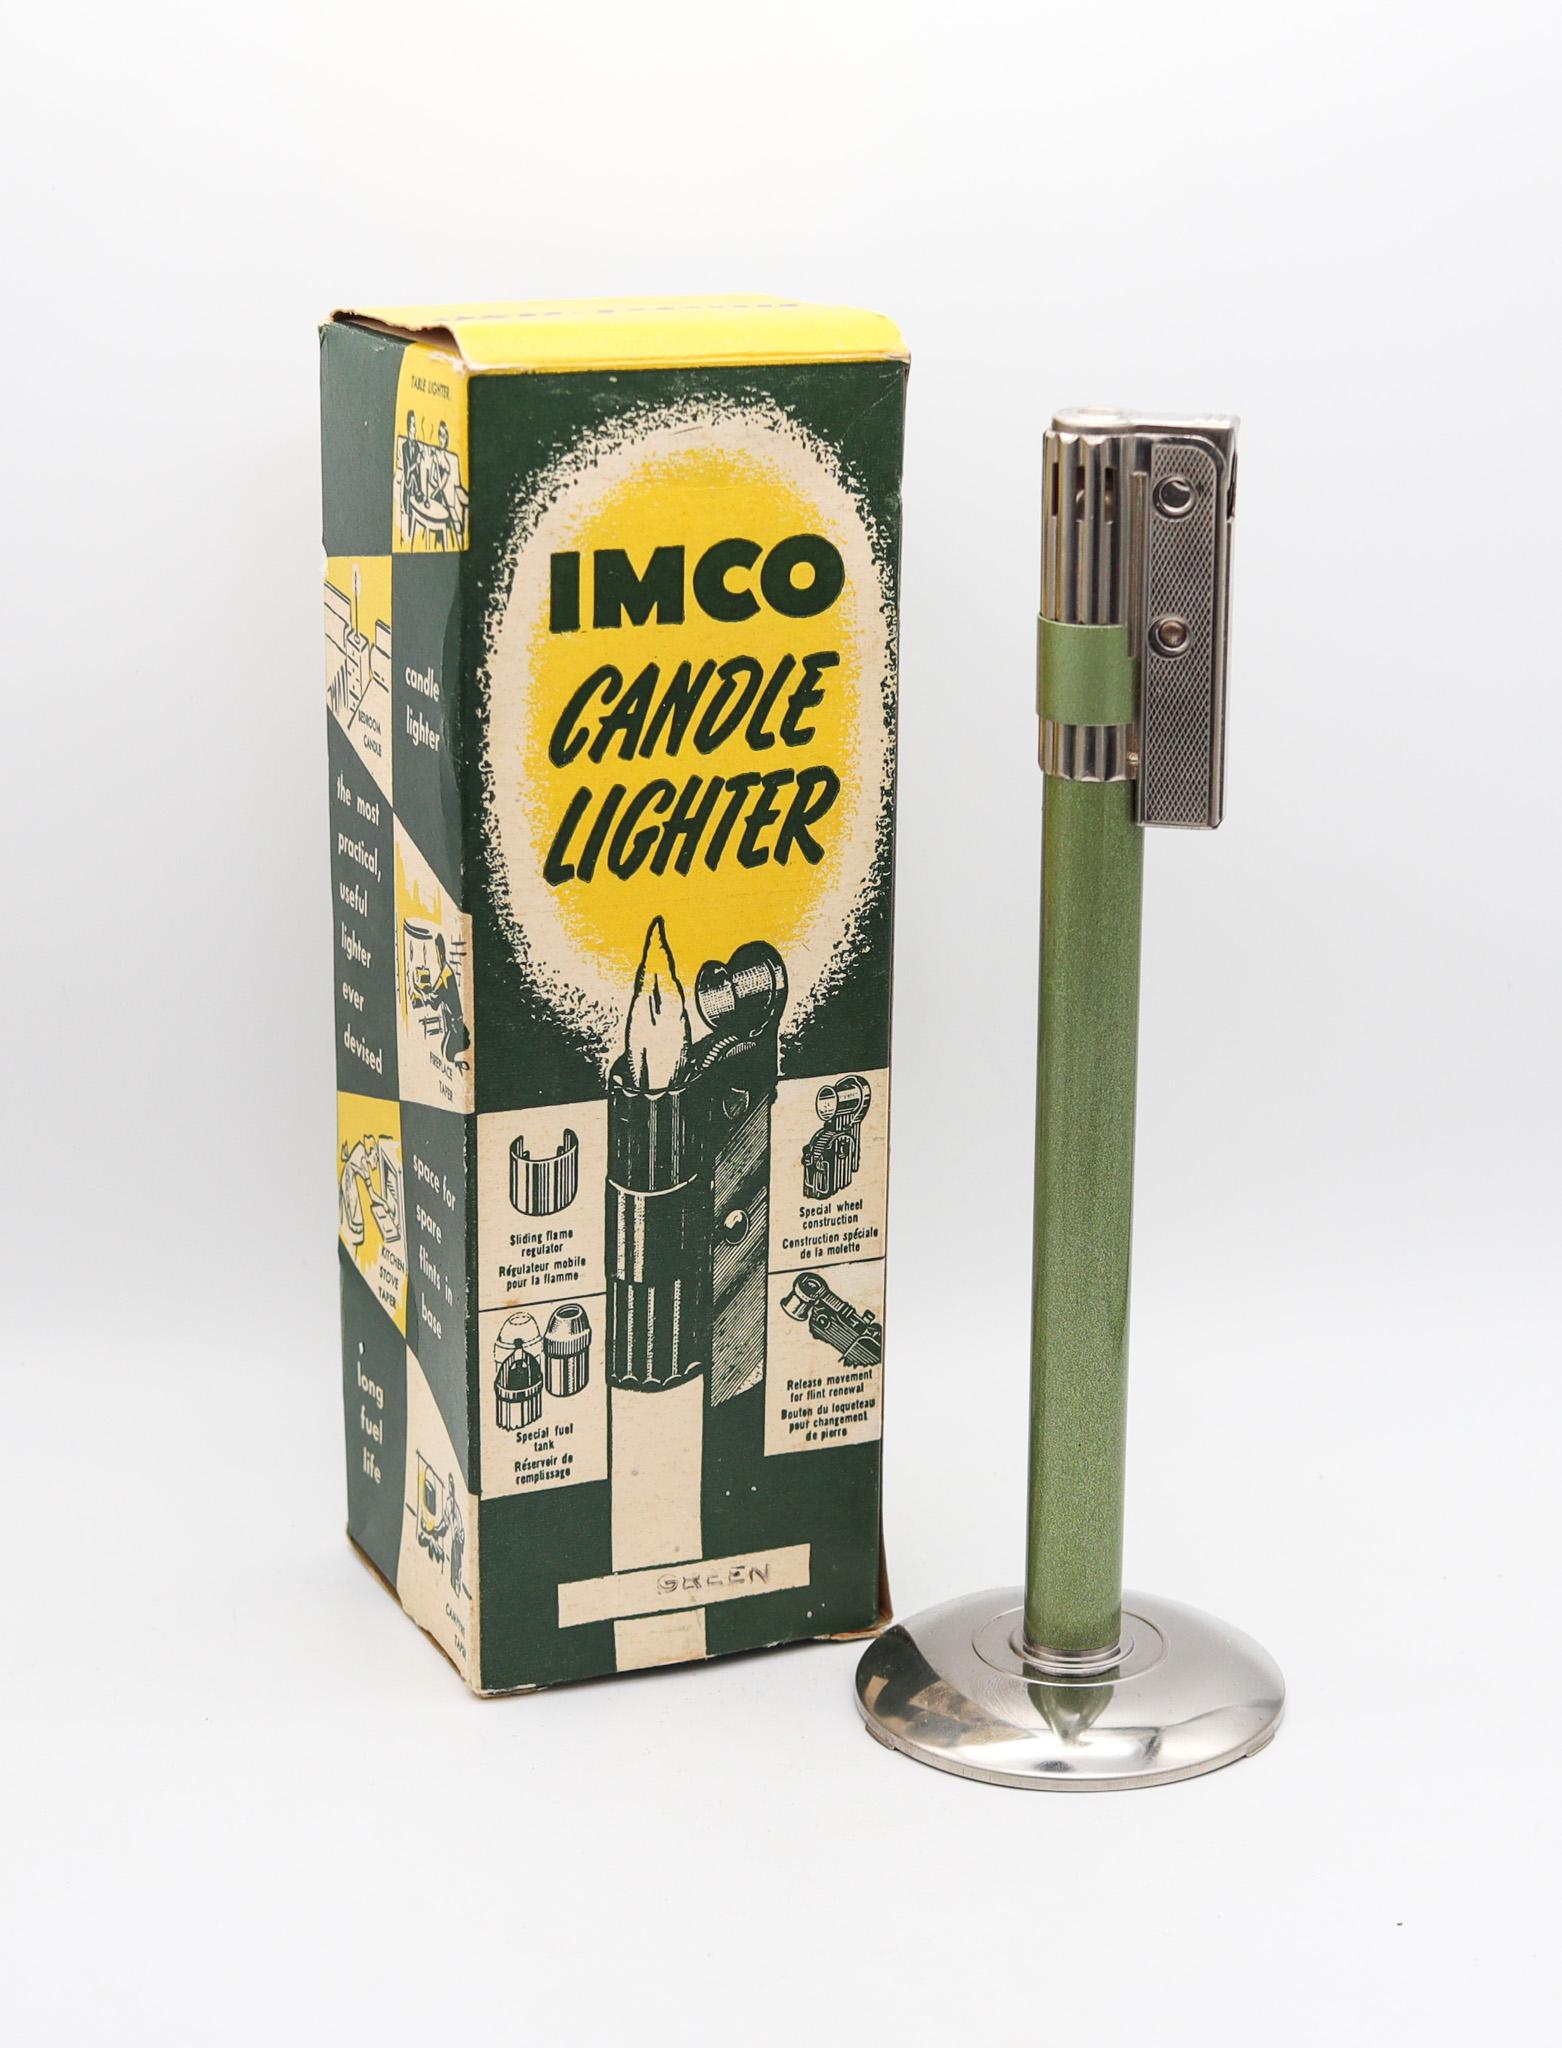 Candle Triplex 6500 table lighter designed by IMCO.

This is a brilliantly engineered, unusual and quite ingenious semi-automatic table petrol lighter designed by Julius Franz Meister in Austria, back in the 1950. This model was made by the IMCO